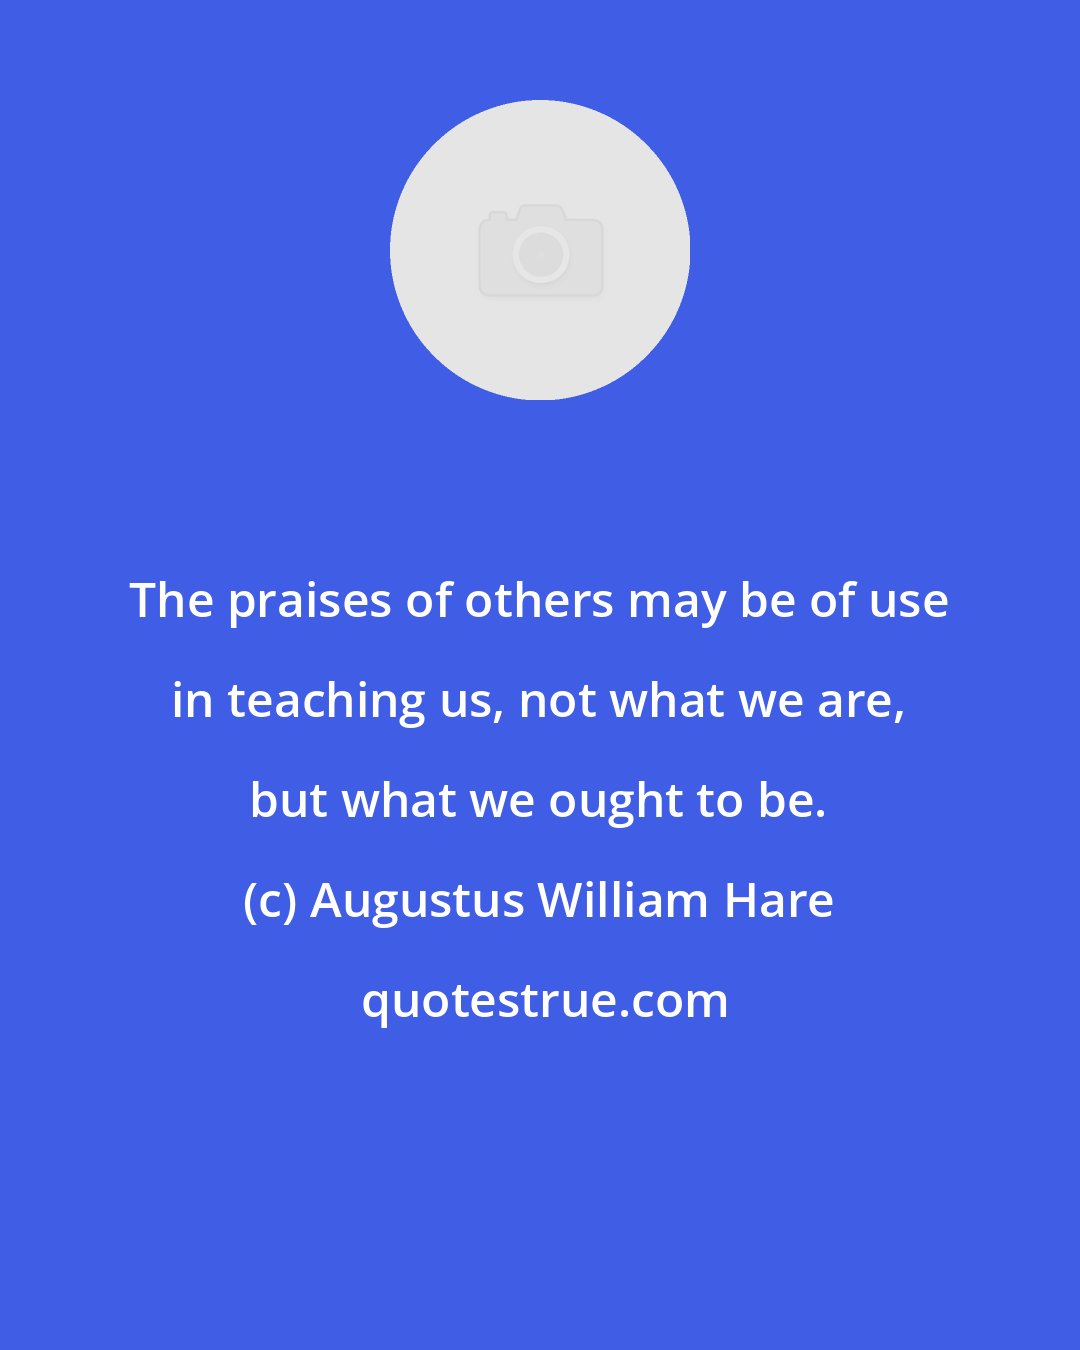 Augustus William Hare: The praises of others may be of use in teaching us, not what we are, but what we ought to be.